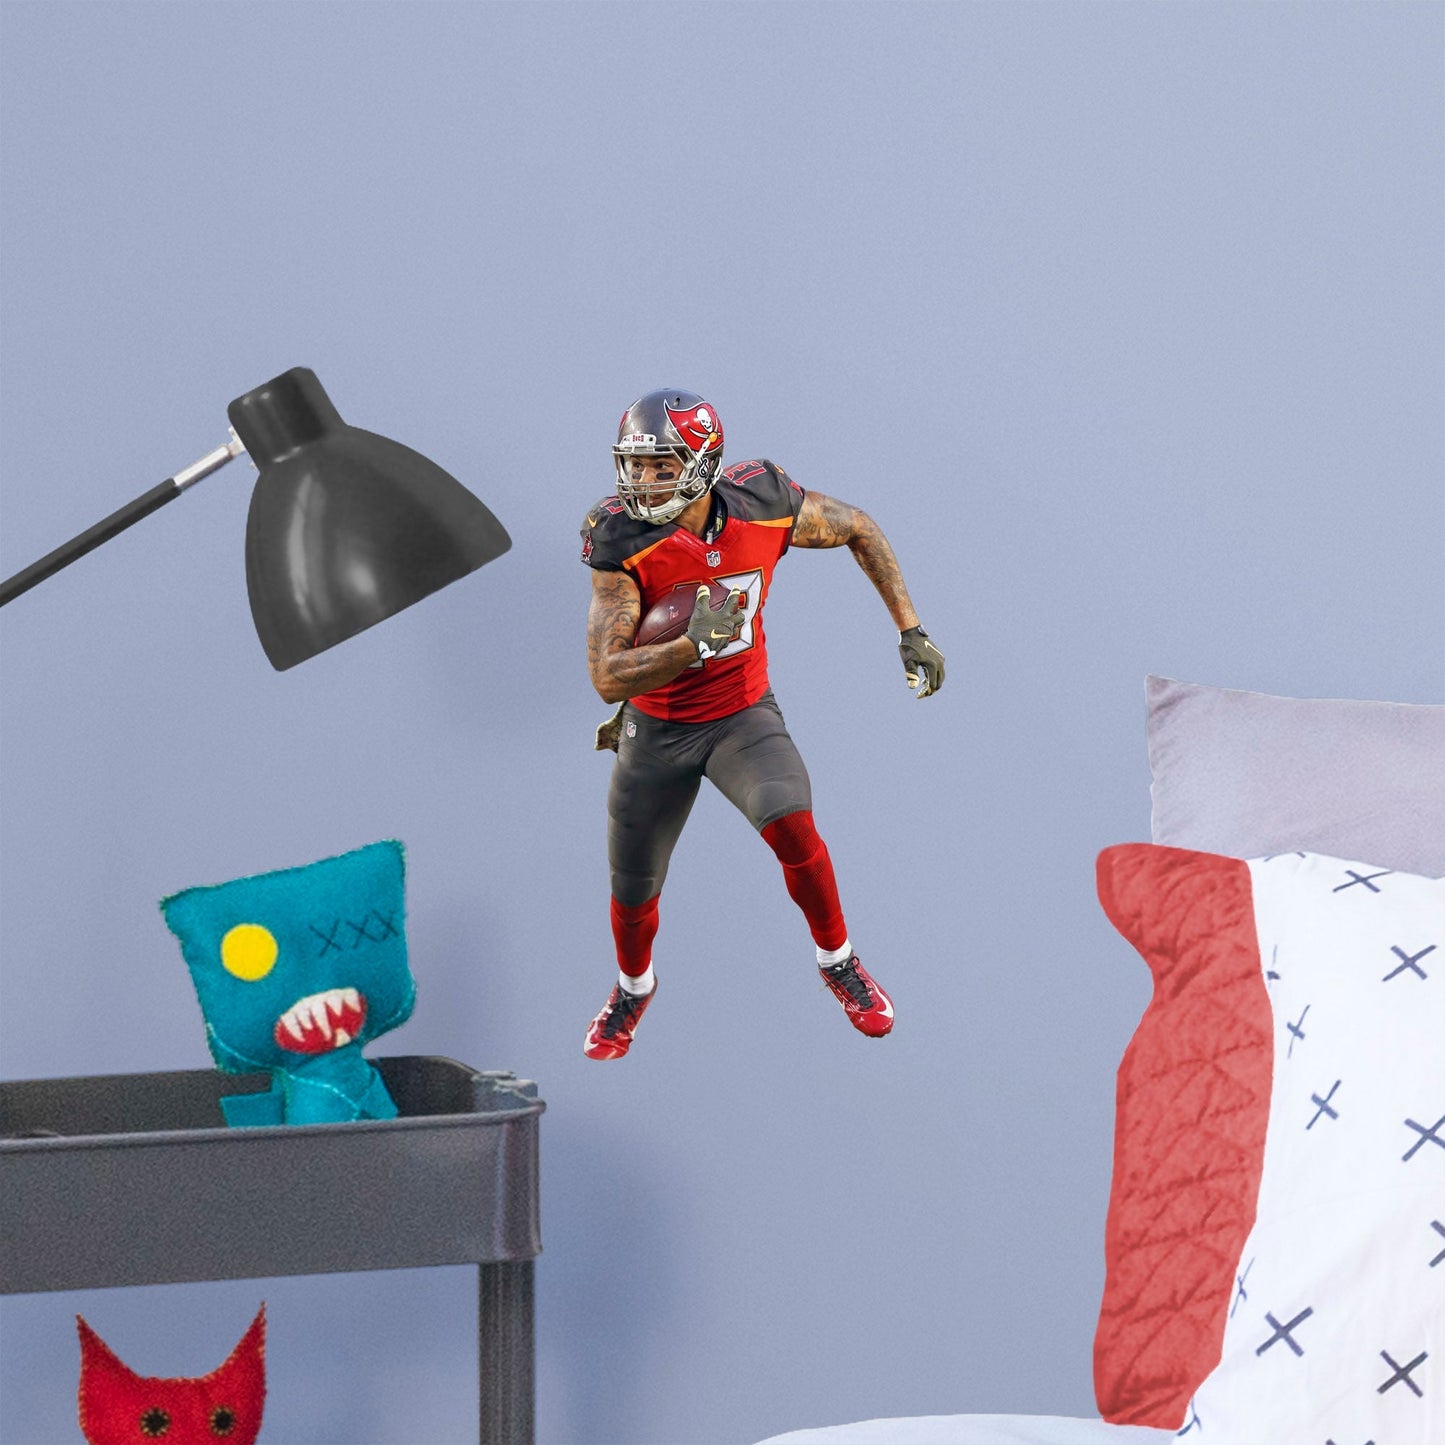 Mike Evans: No. 13 - Officially Licensed NFL Removable Wall Decal